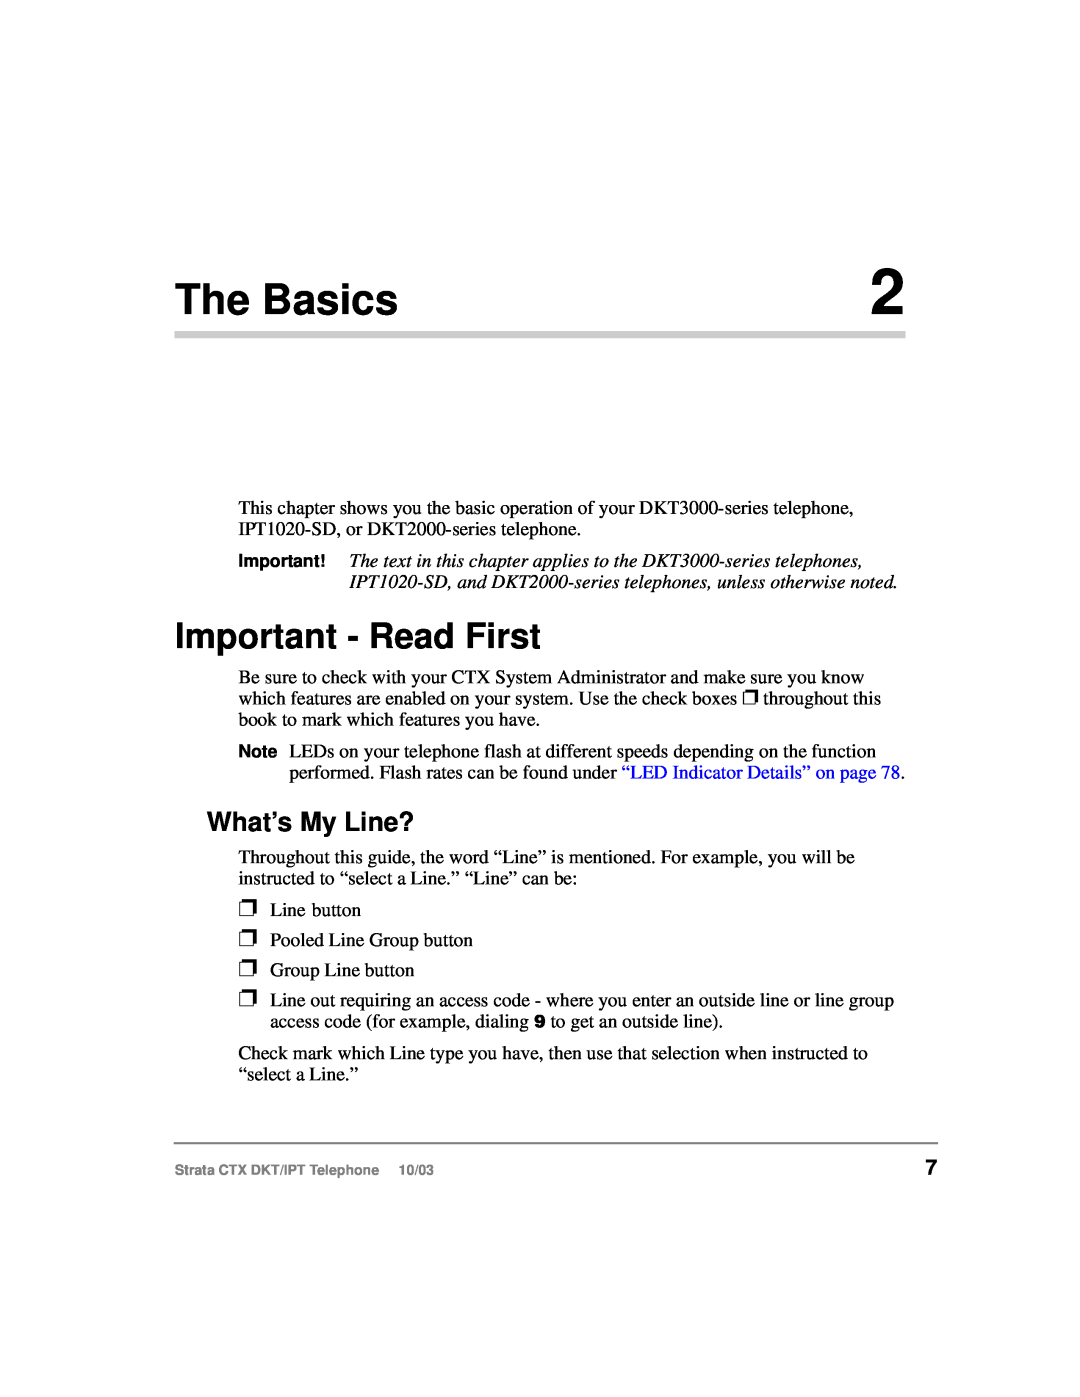 Toshiba DKT, IPT manual The Basics, Important - Read First, What’s My Line? 